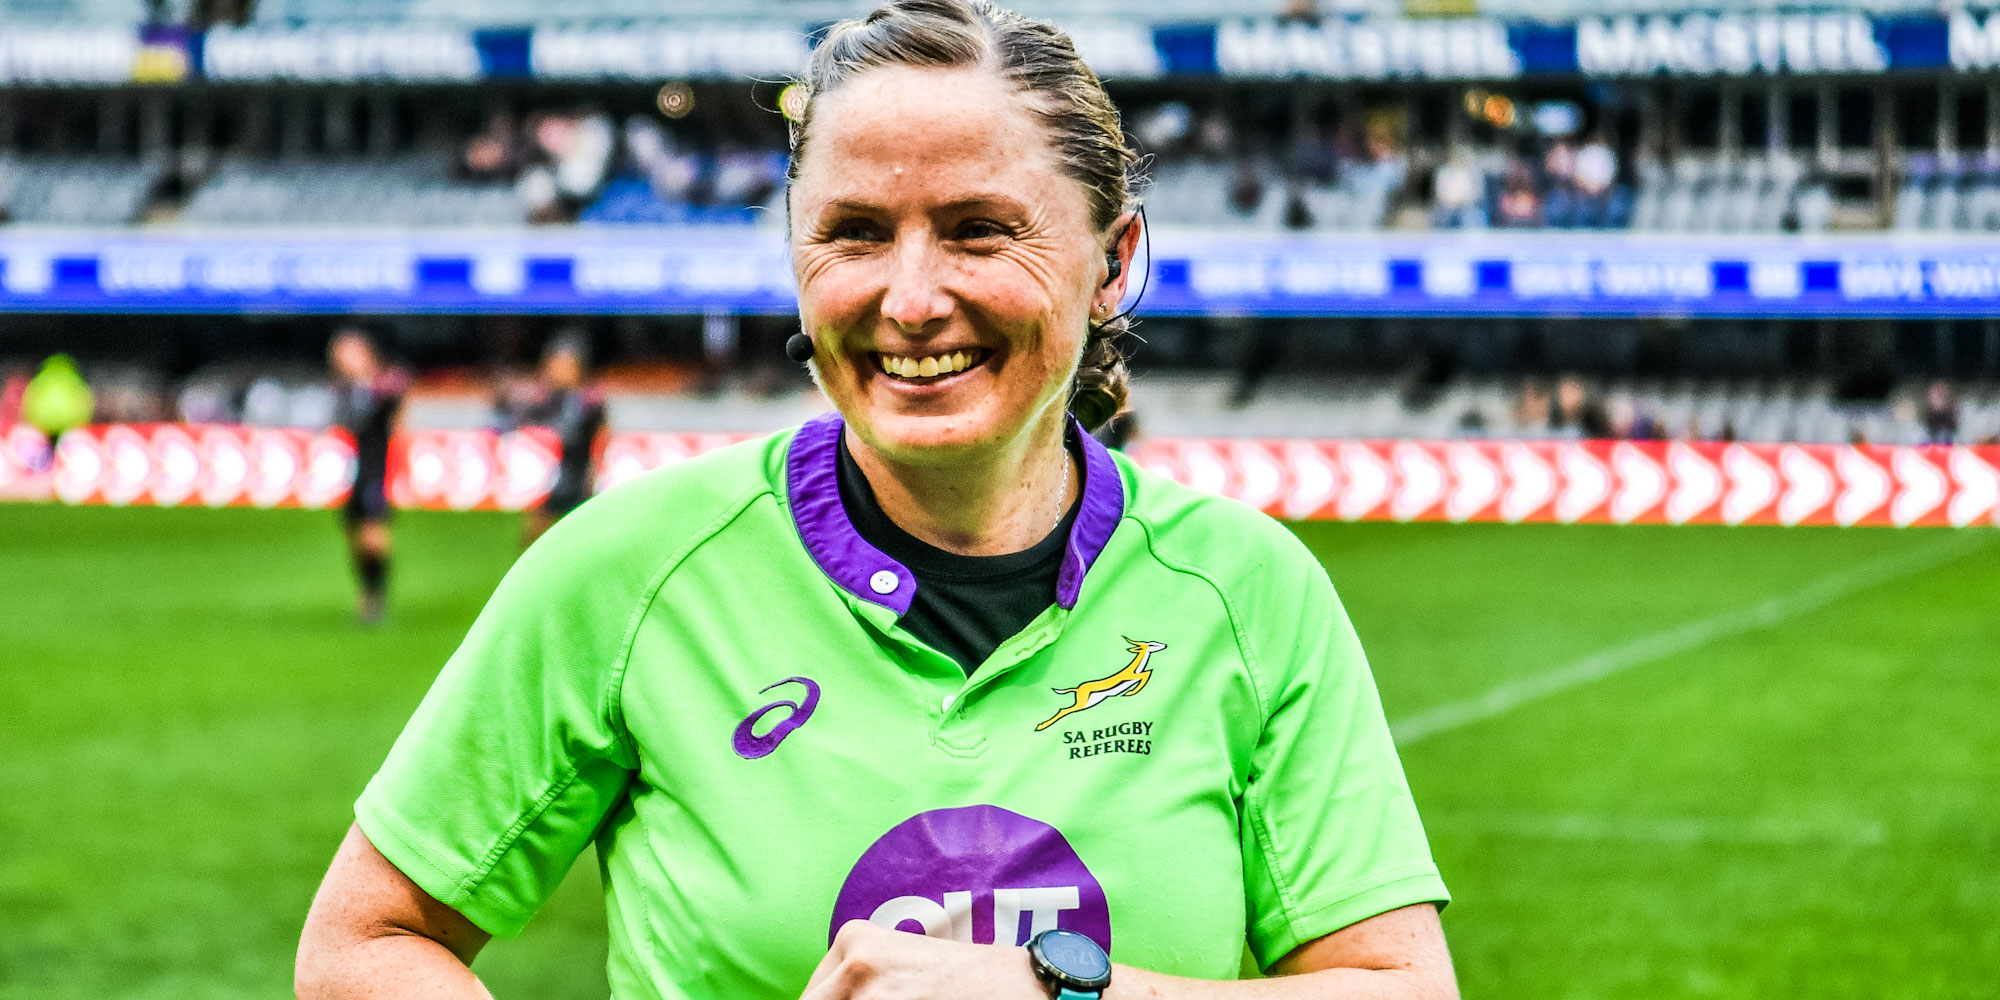 OUTsurance Referee of the Year: Aimee Barrett-Theron